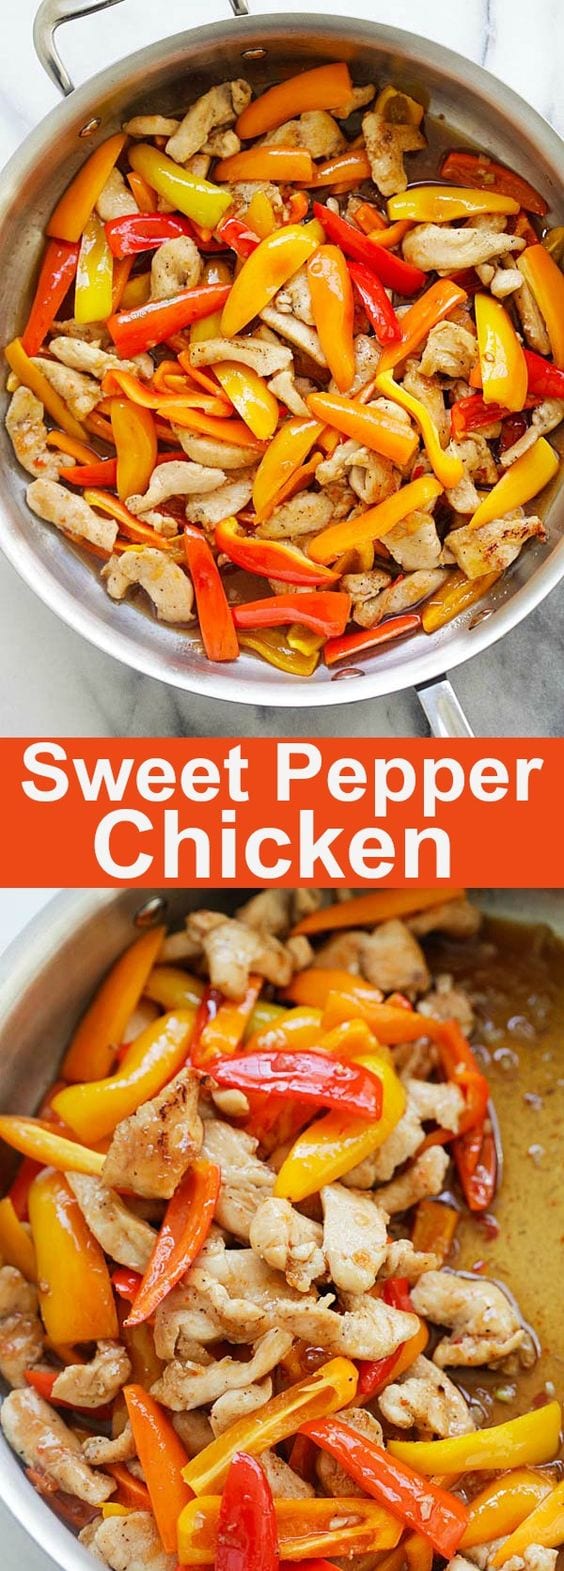 Sweet Pepper Chicken - quick and easy chicken stir-fry with mini sweet peppers, in a savory and sweet sauce made with Thai sweet chili sauce and oyster sauce. So delicious | rasamalaysia.com